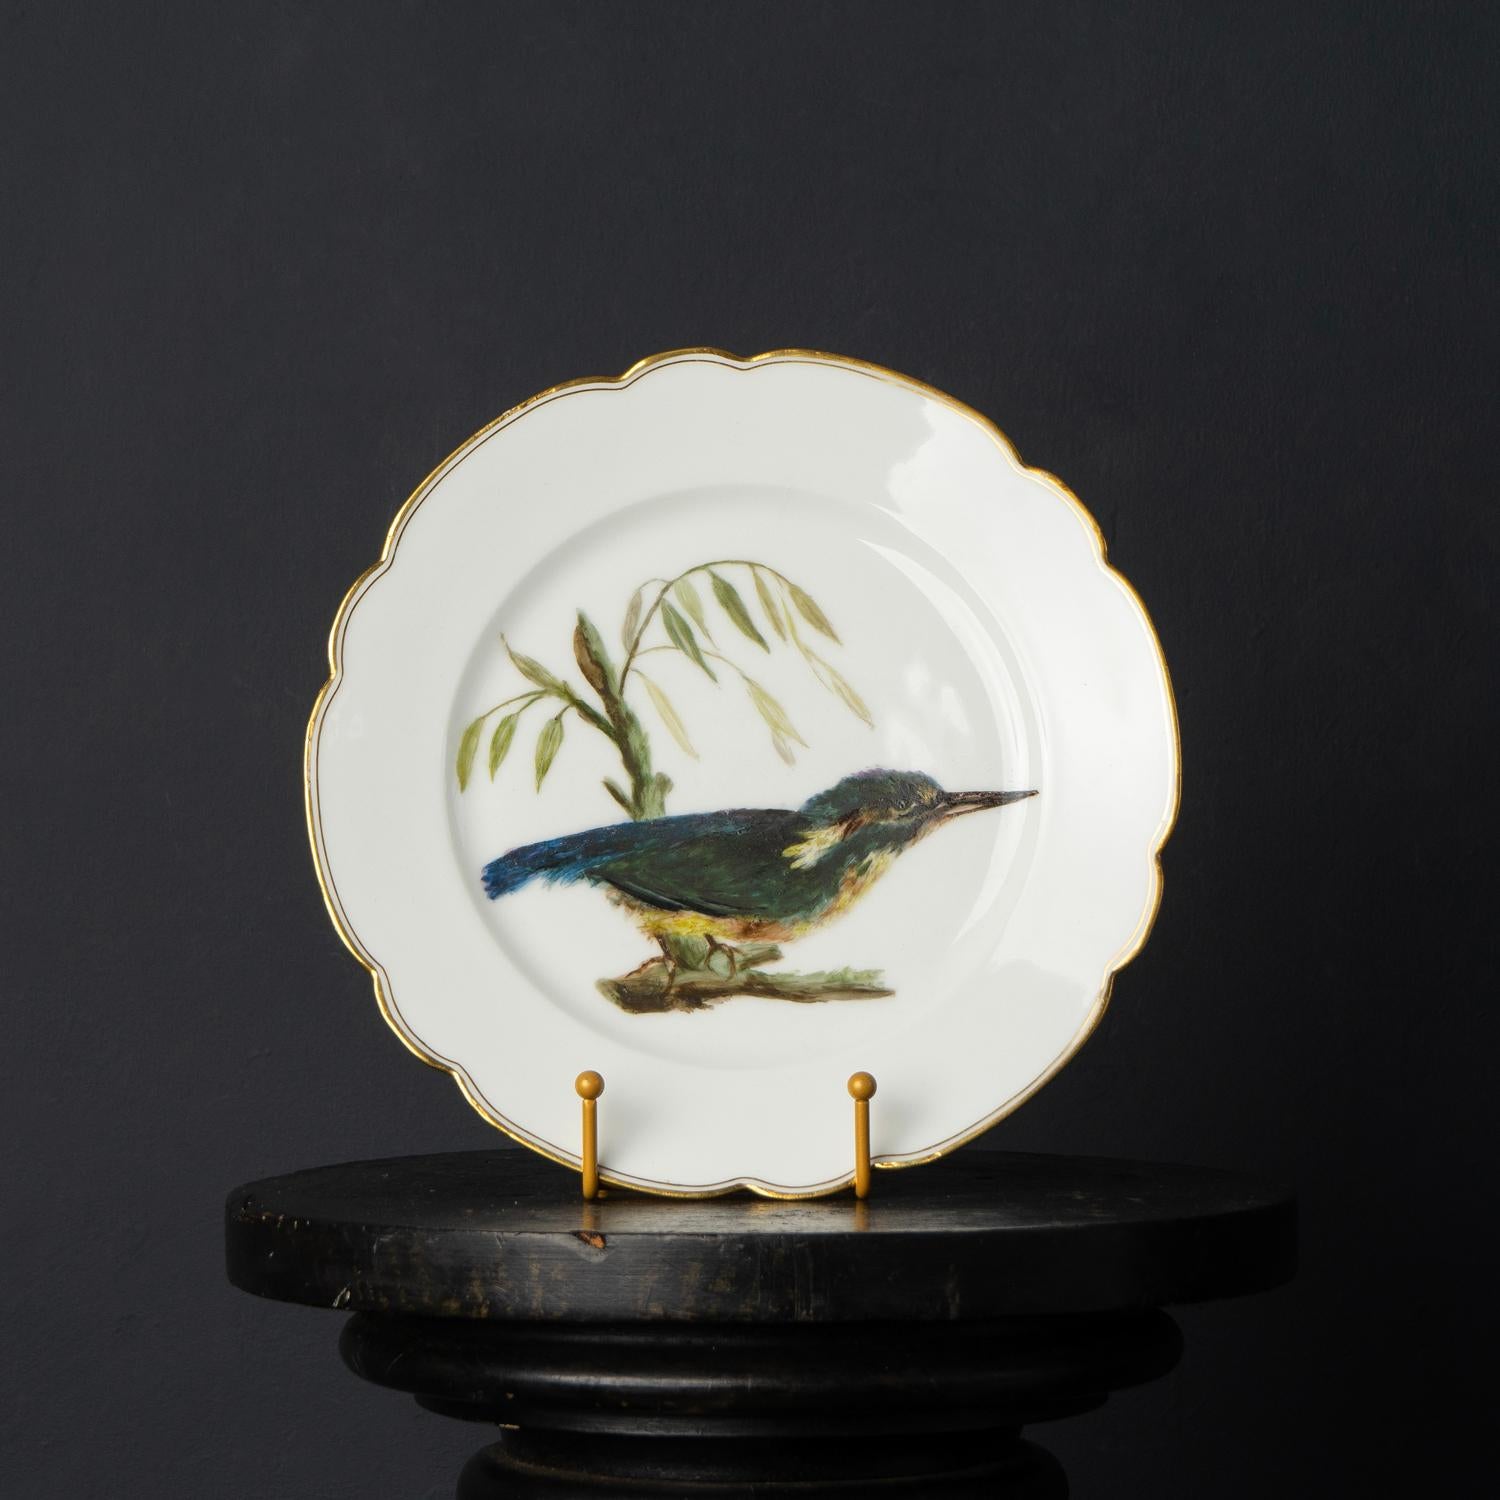 ANTIQUE BIRD PLATE
An extremely charming original hand-painted depiction of a kingfisher in a naturalistic setting on a porcelain plate.

Inscribed verso ‘Le Martin-Pêcheur’ which translates as ‘The Kingfisher’ and is signed by the artist